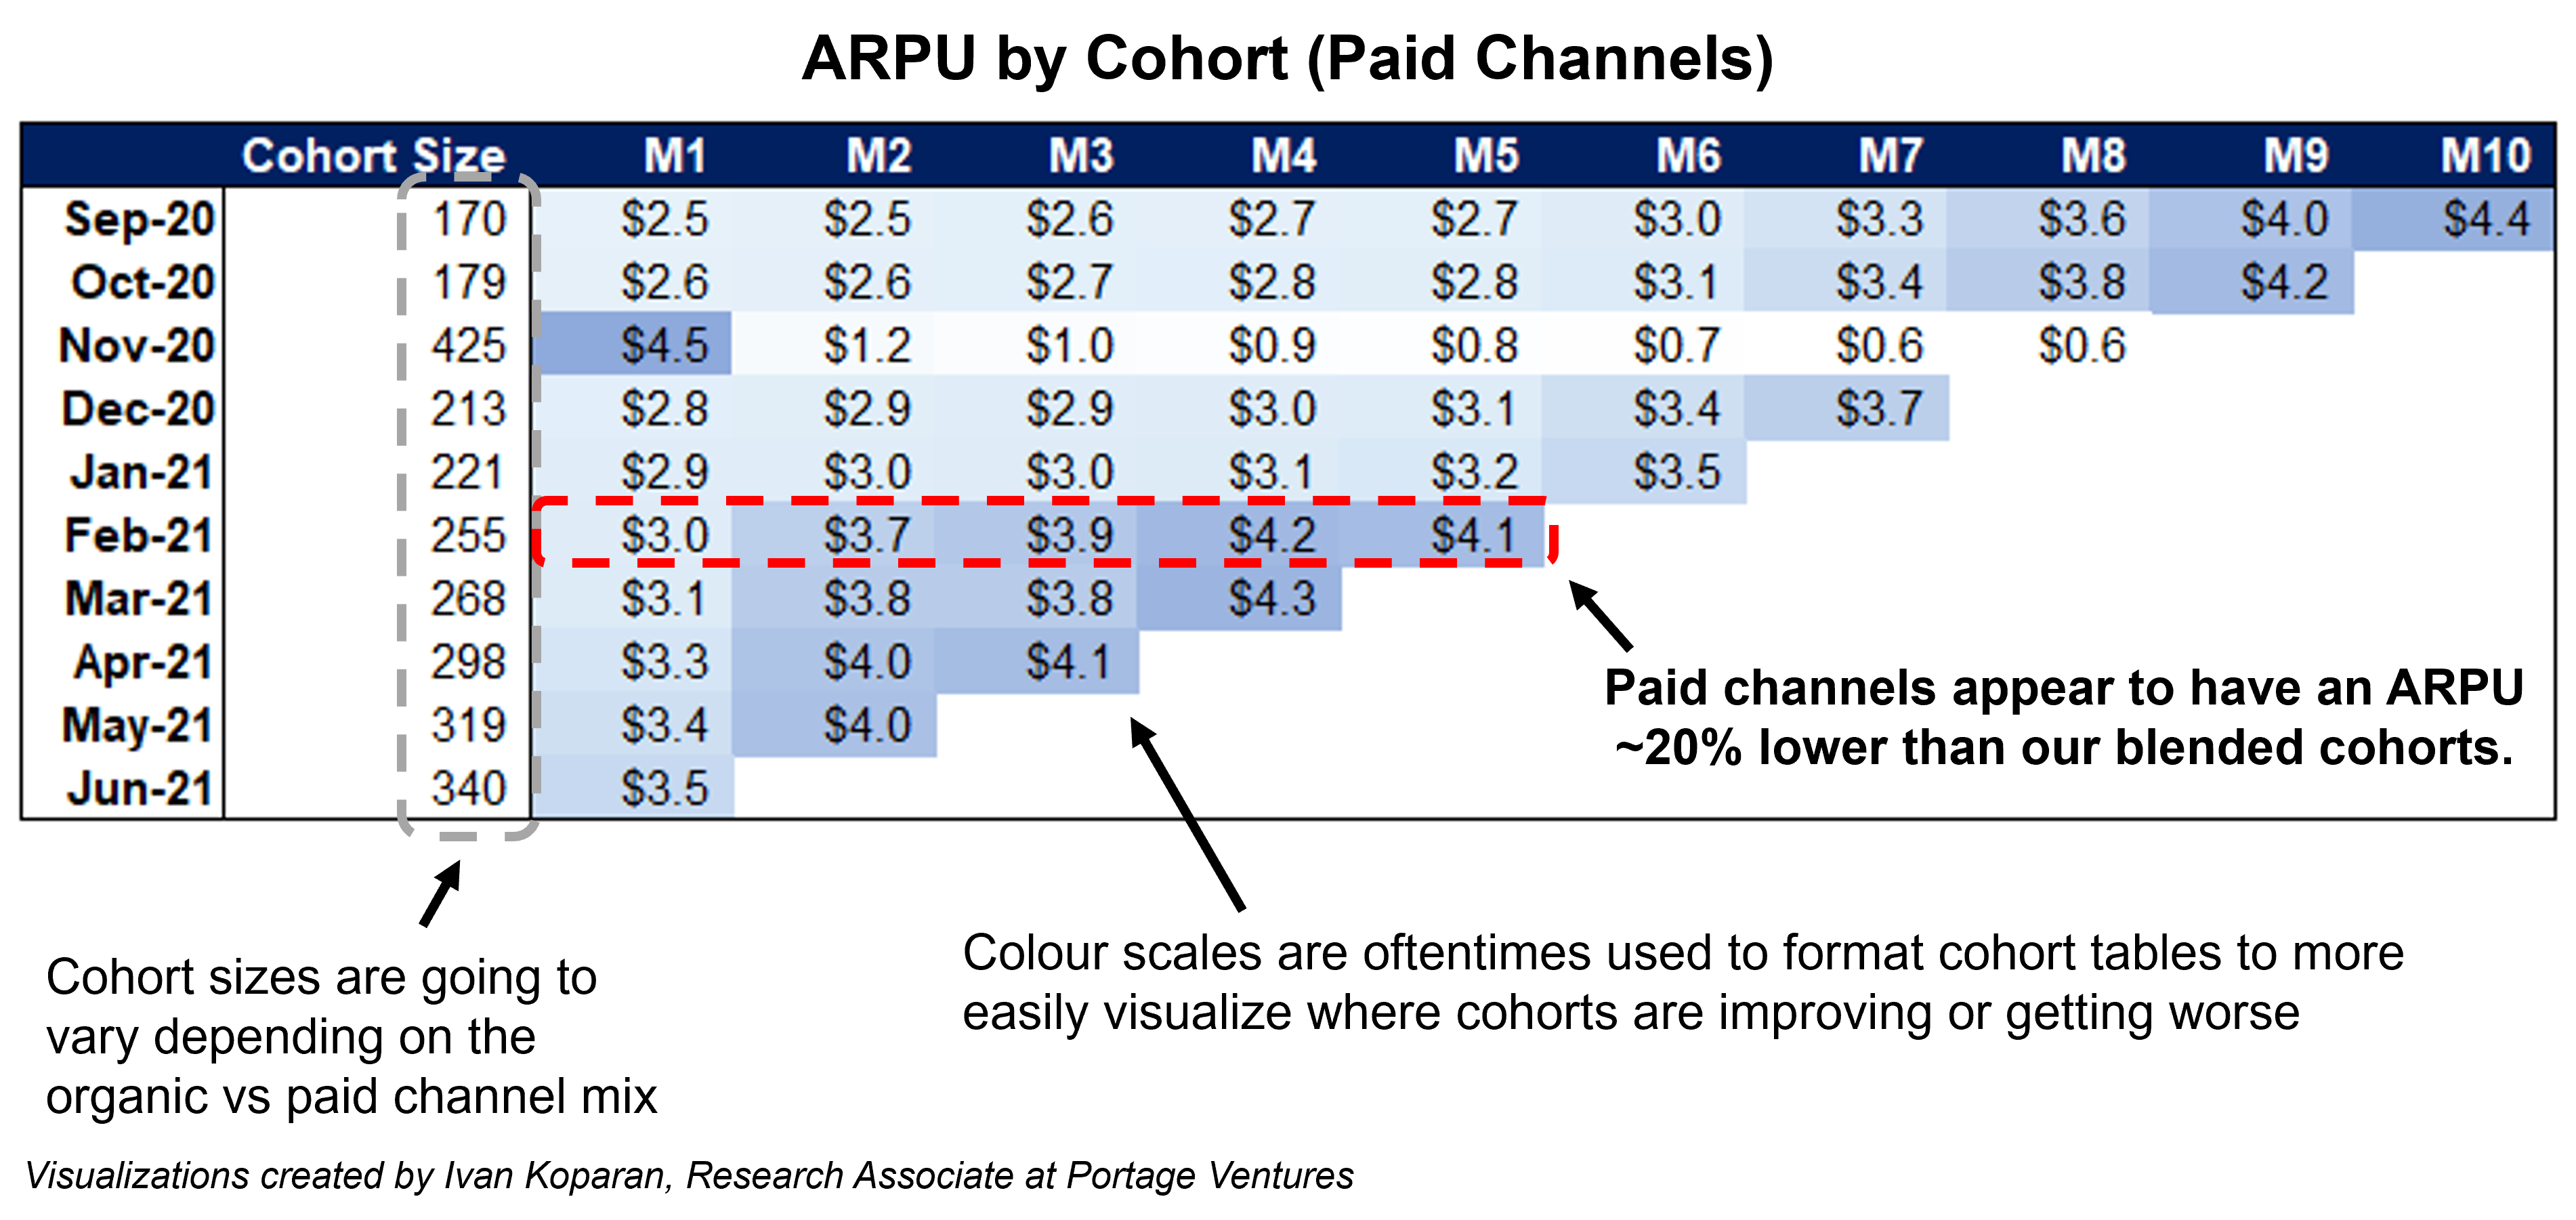 ARPU by cohort (paid channels)